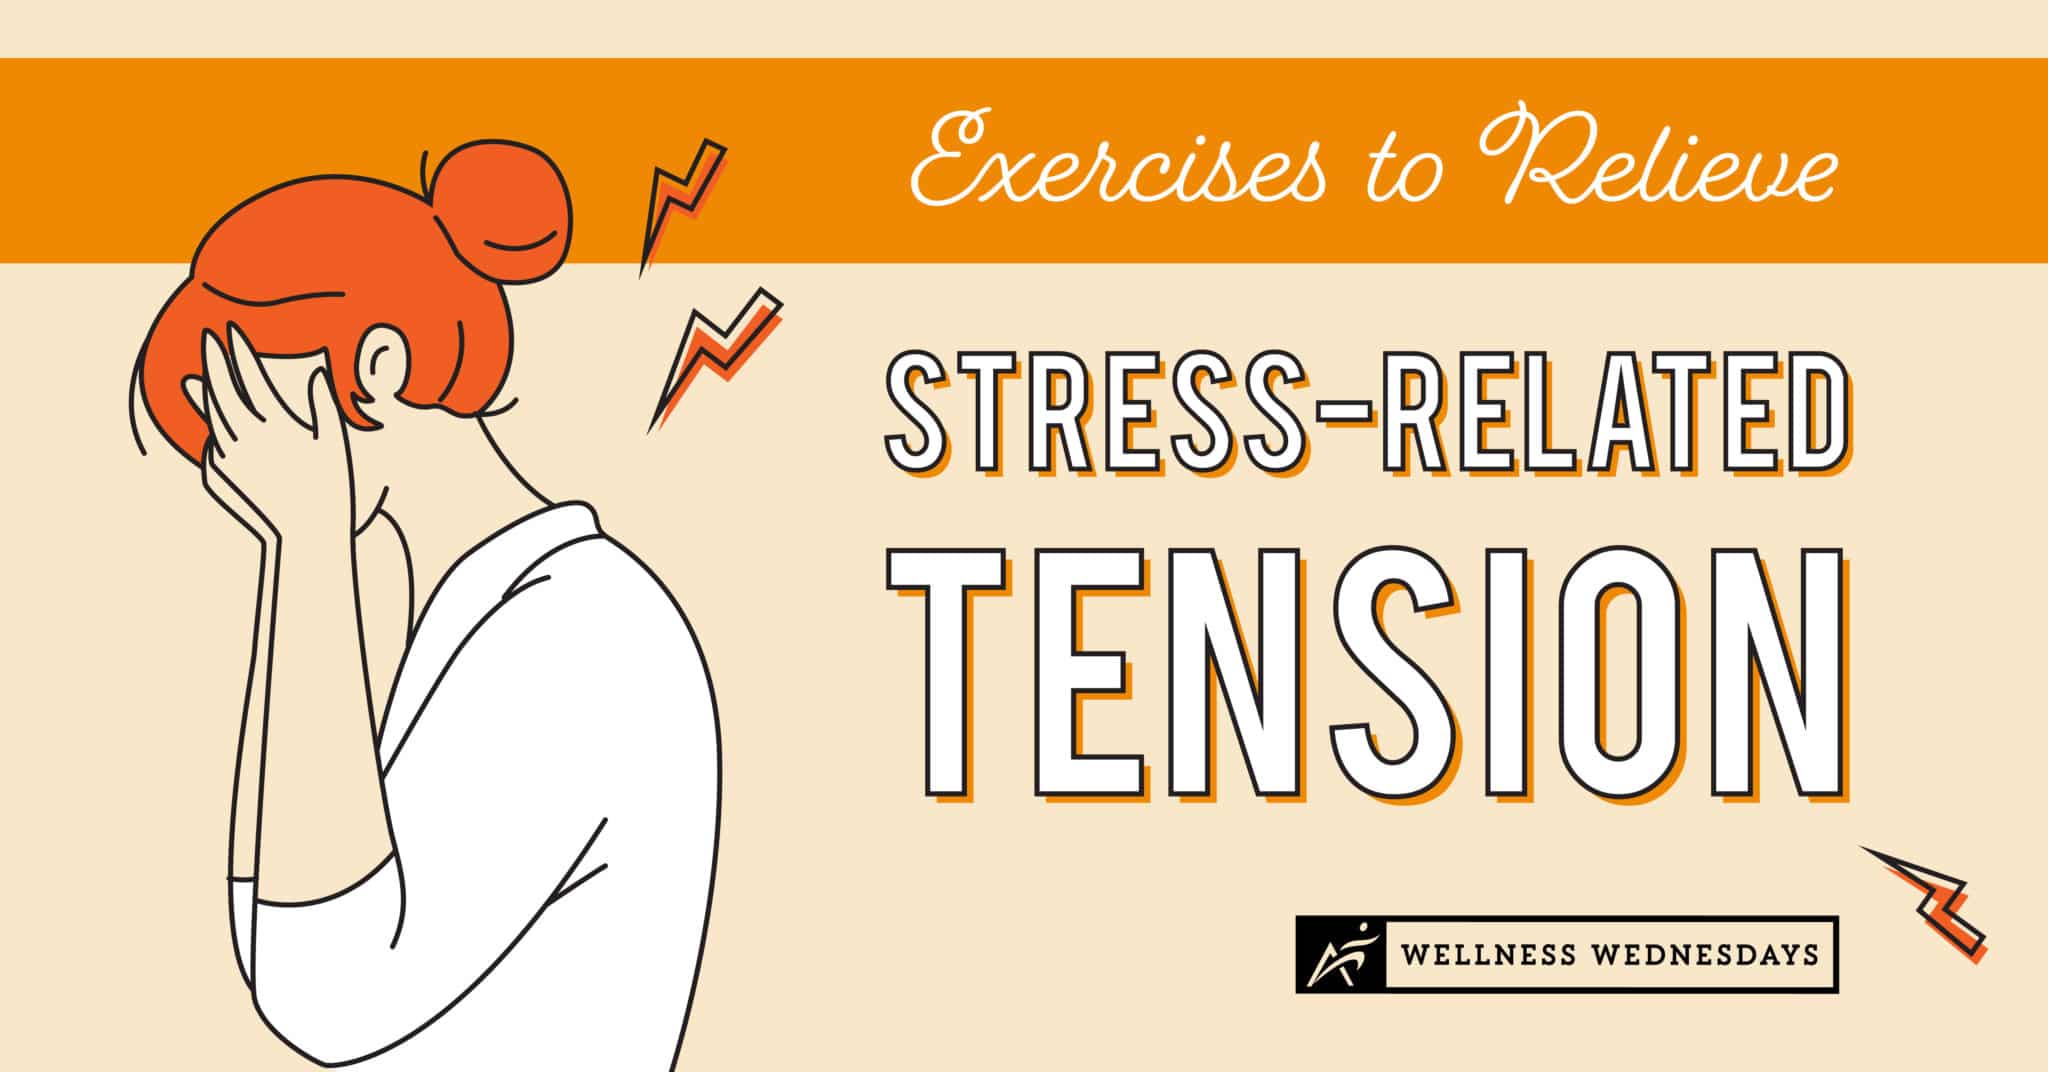 Why Chiropractic Should Be Part of Your Stress Relief Routine